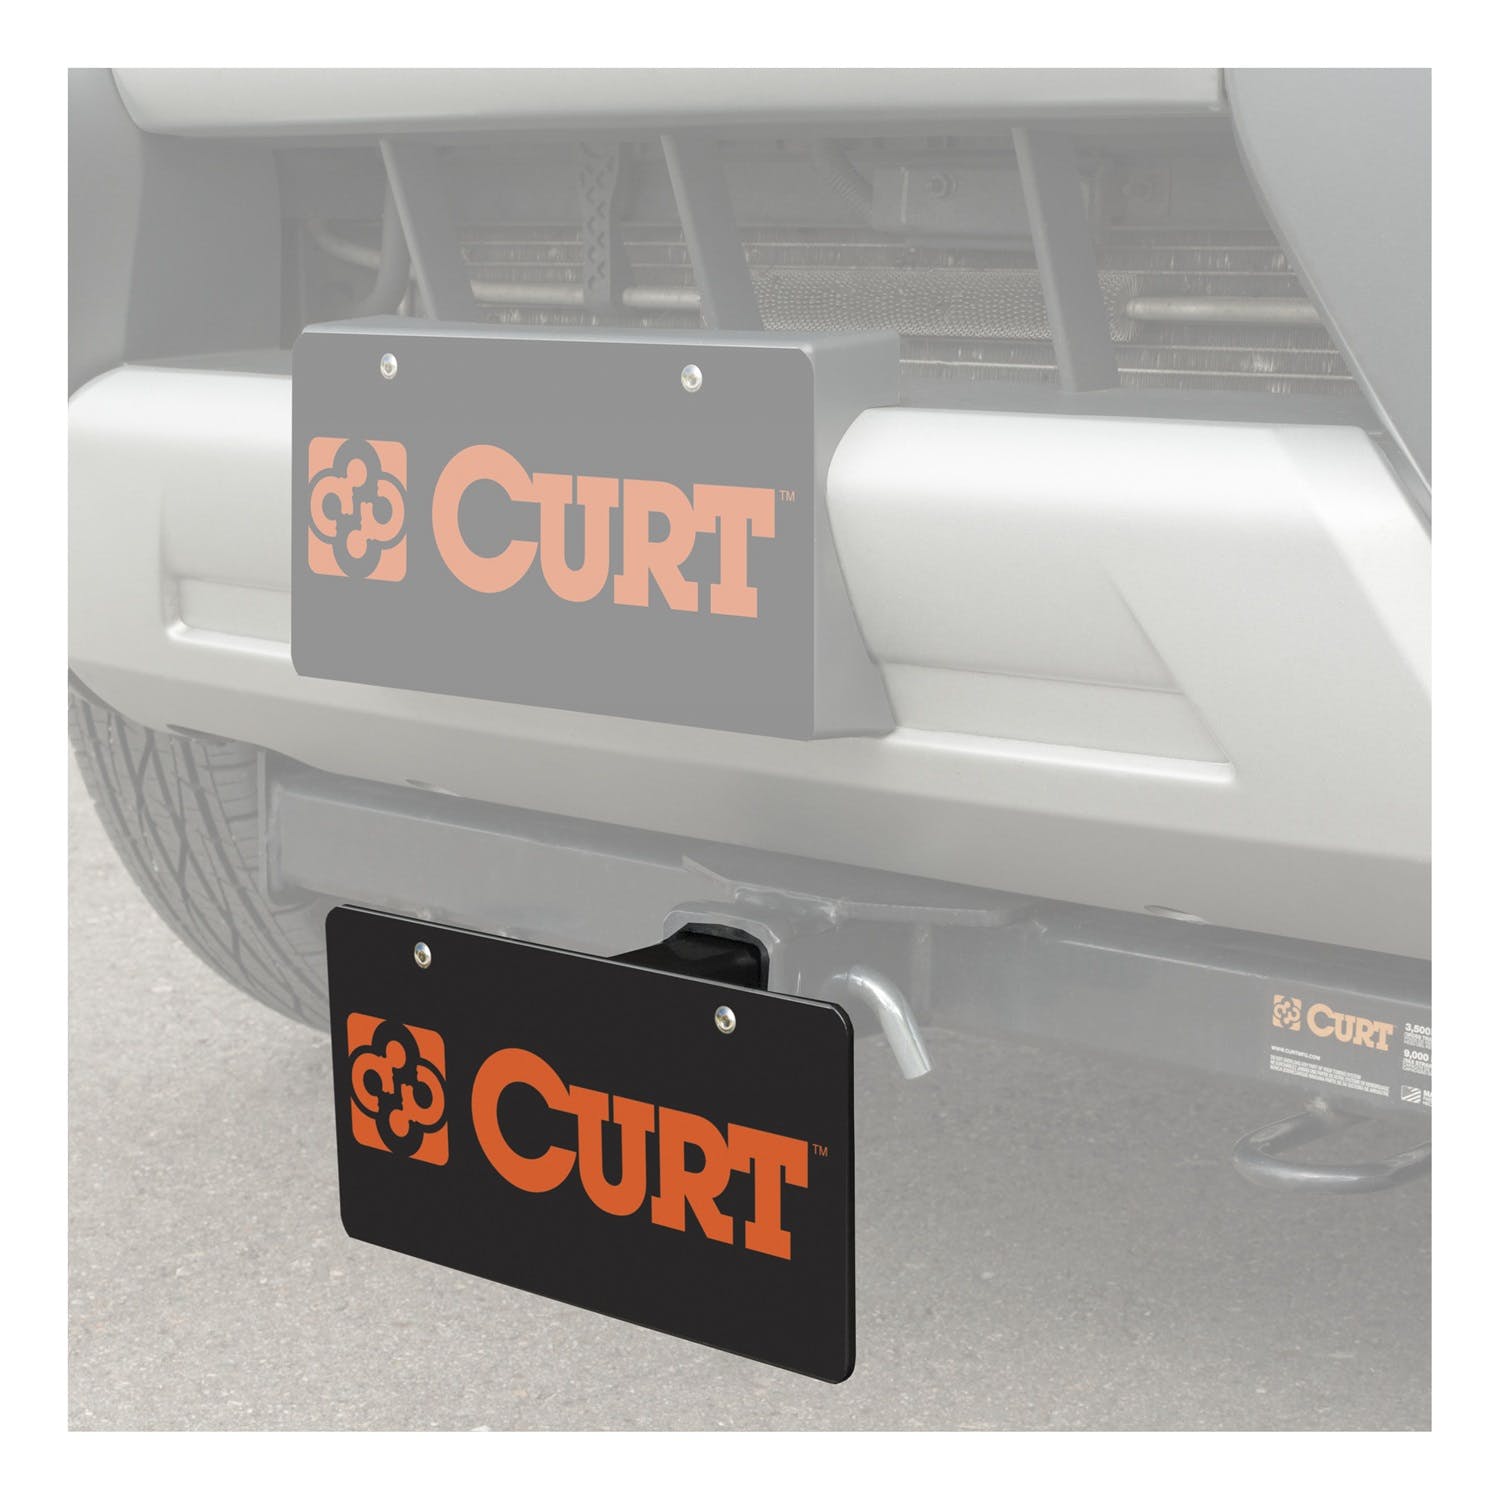 CURT 31002 Hitch-Mounted License Plate Holder (Fits 2 Receiver)